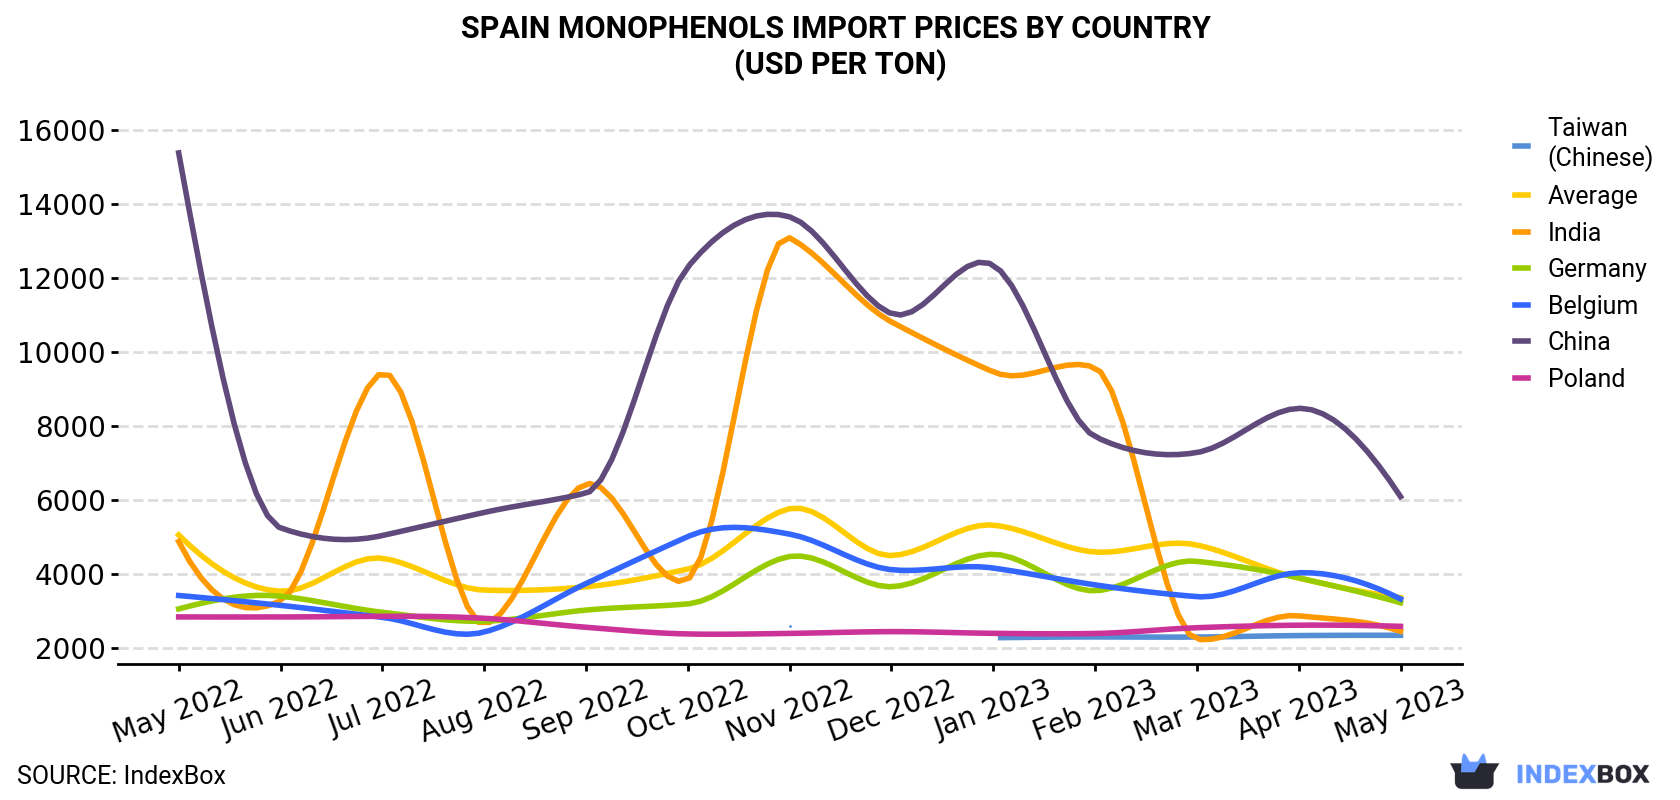 Spain Monophenols Import Prices By Country (USD Per Ton)